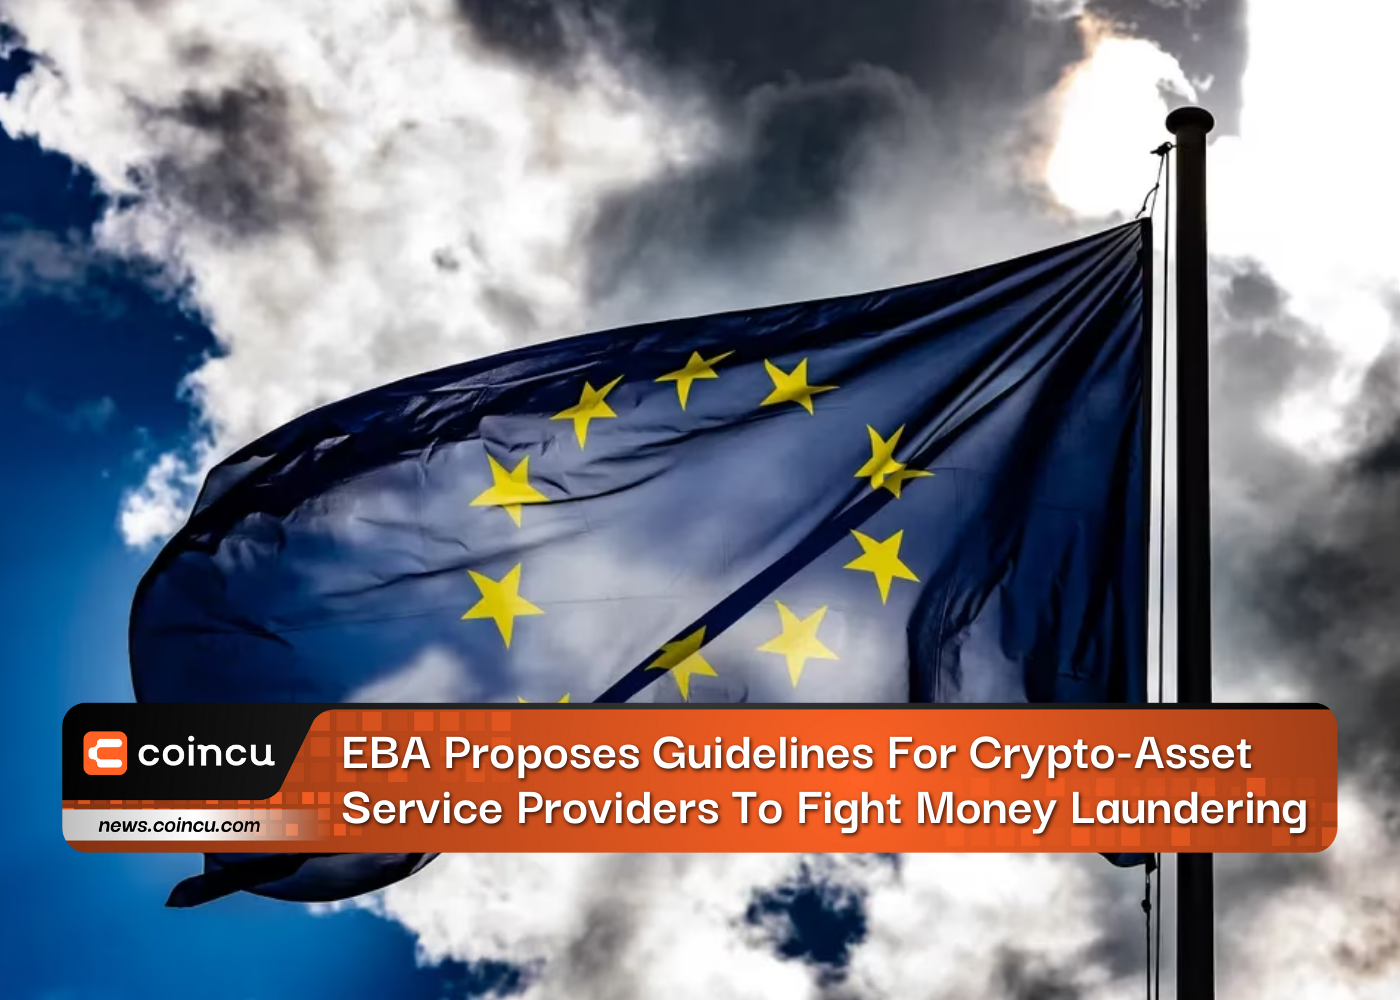 EBA Proposes Guidelines For Crypto-Asset Service Providers To Fight Money Laundering